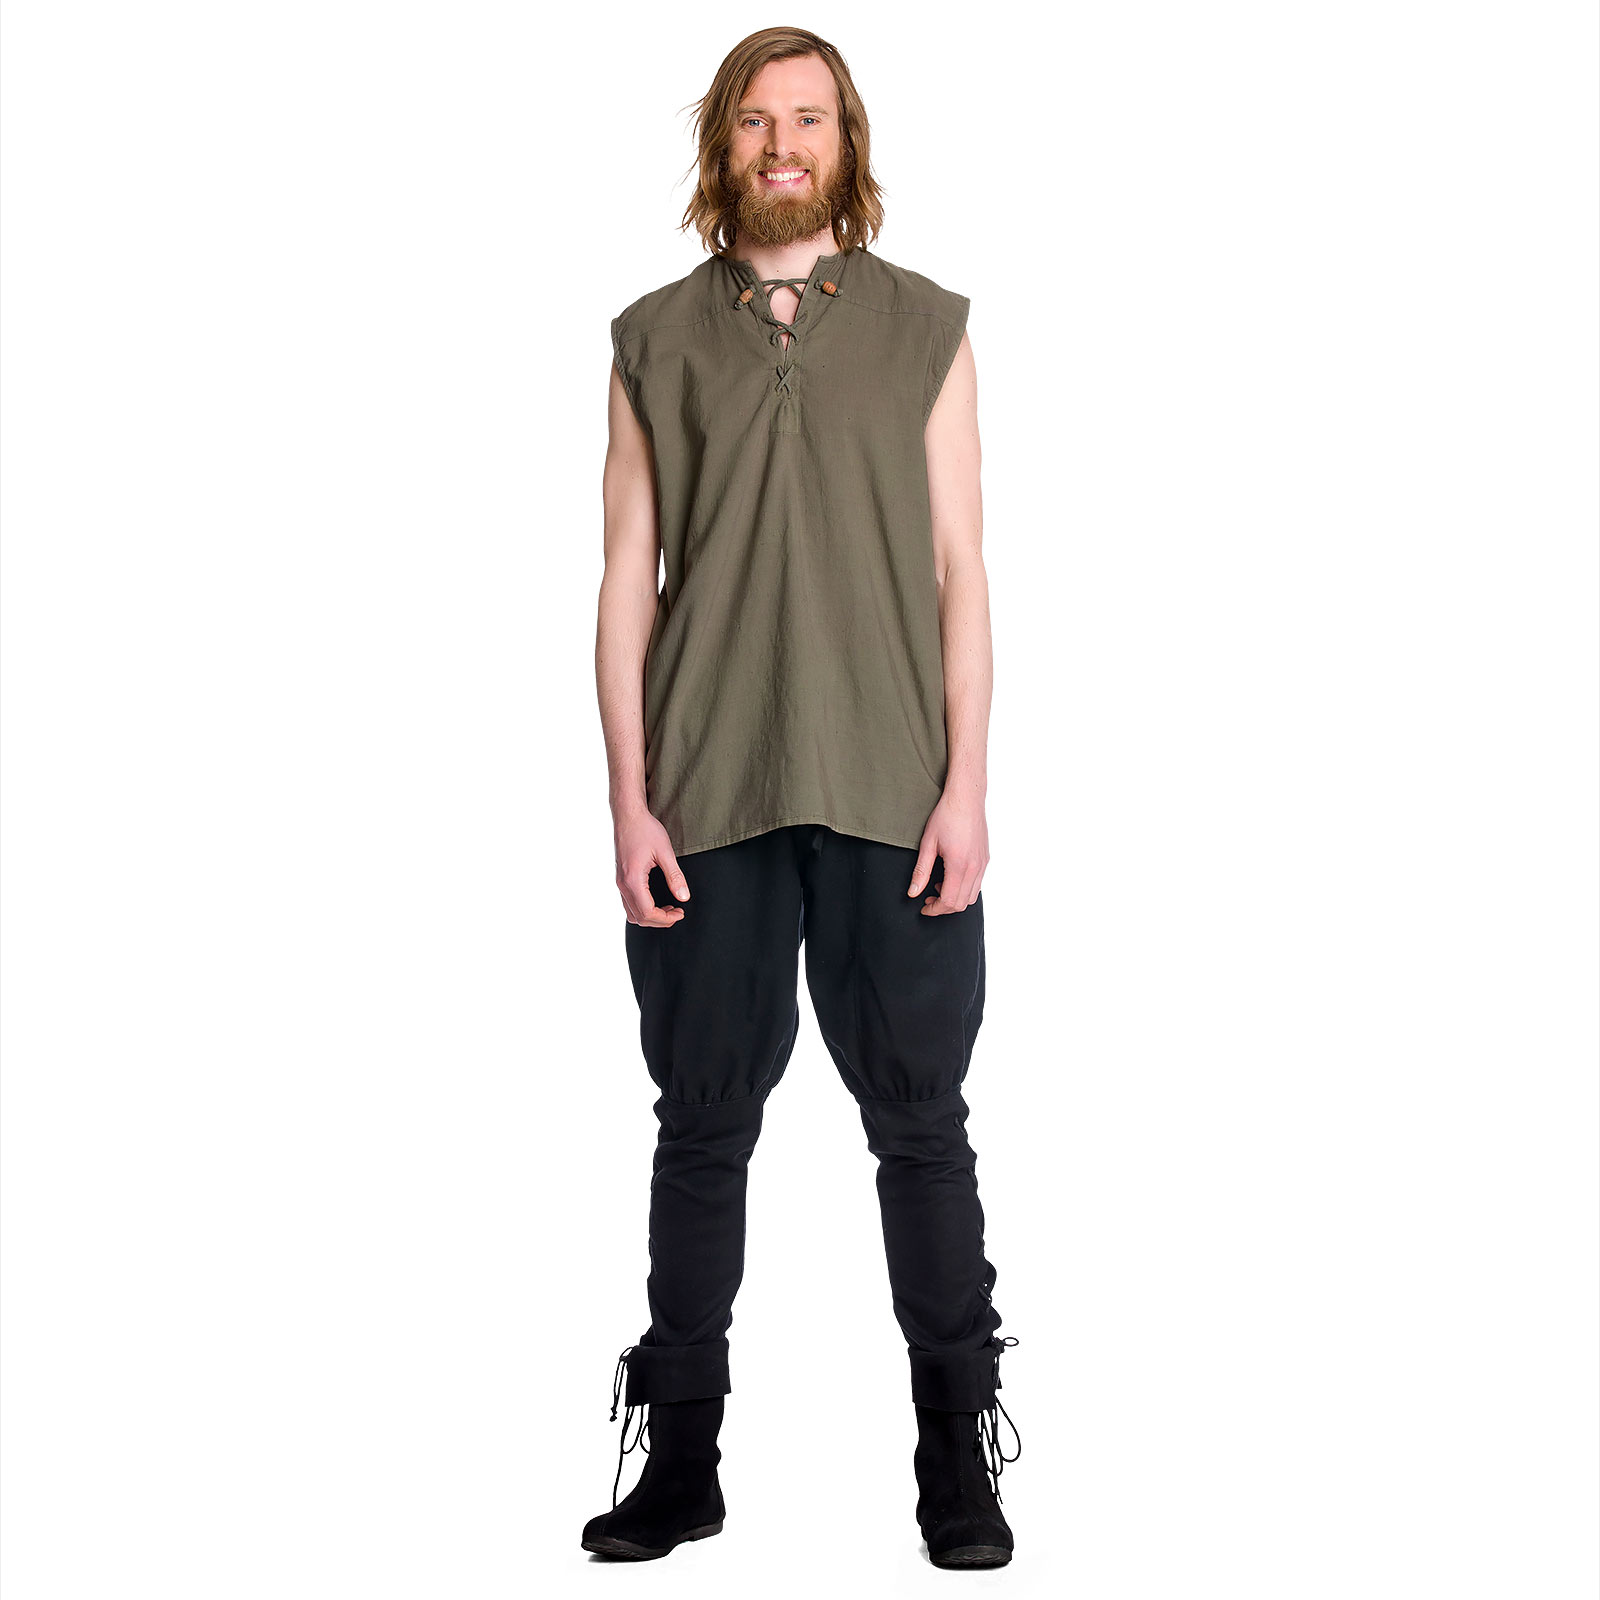 Medieval lace-up shirt sleeveless olive